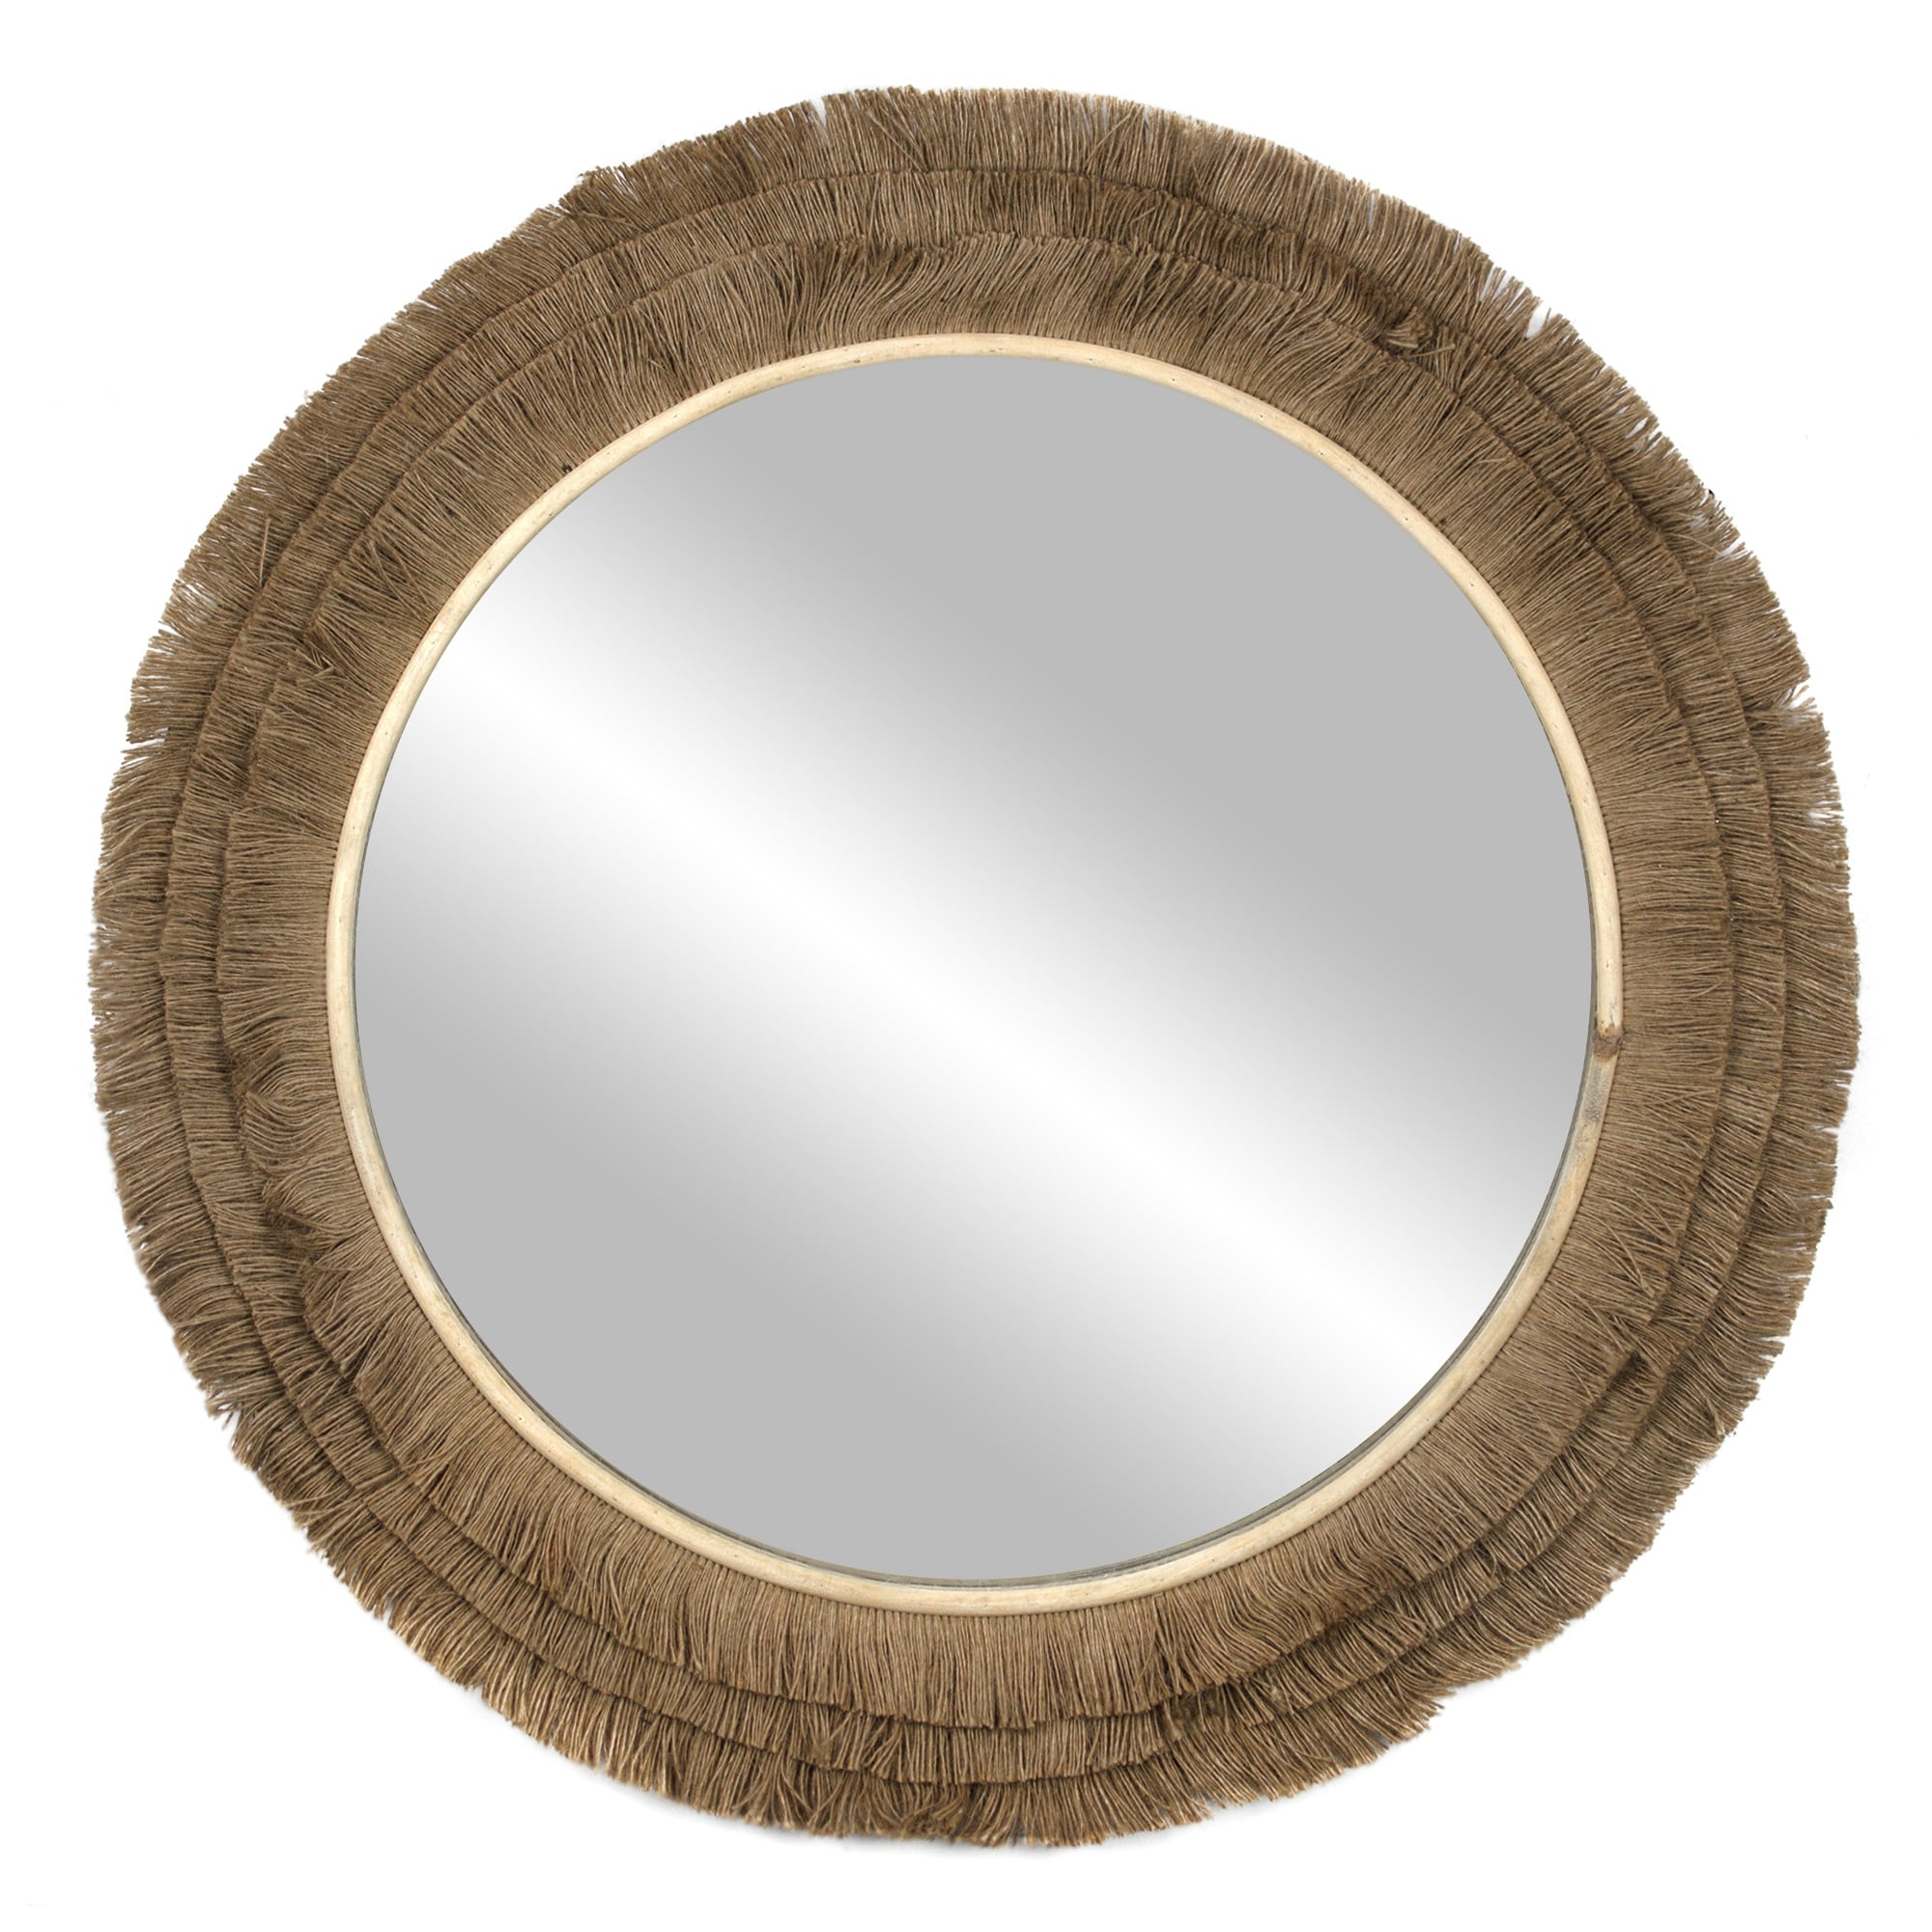 Jeco Decorative Mirror in Black and Distressed Brown 